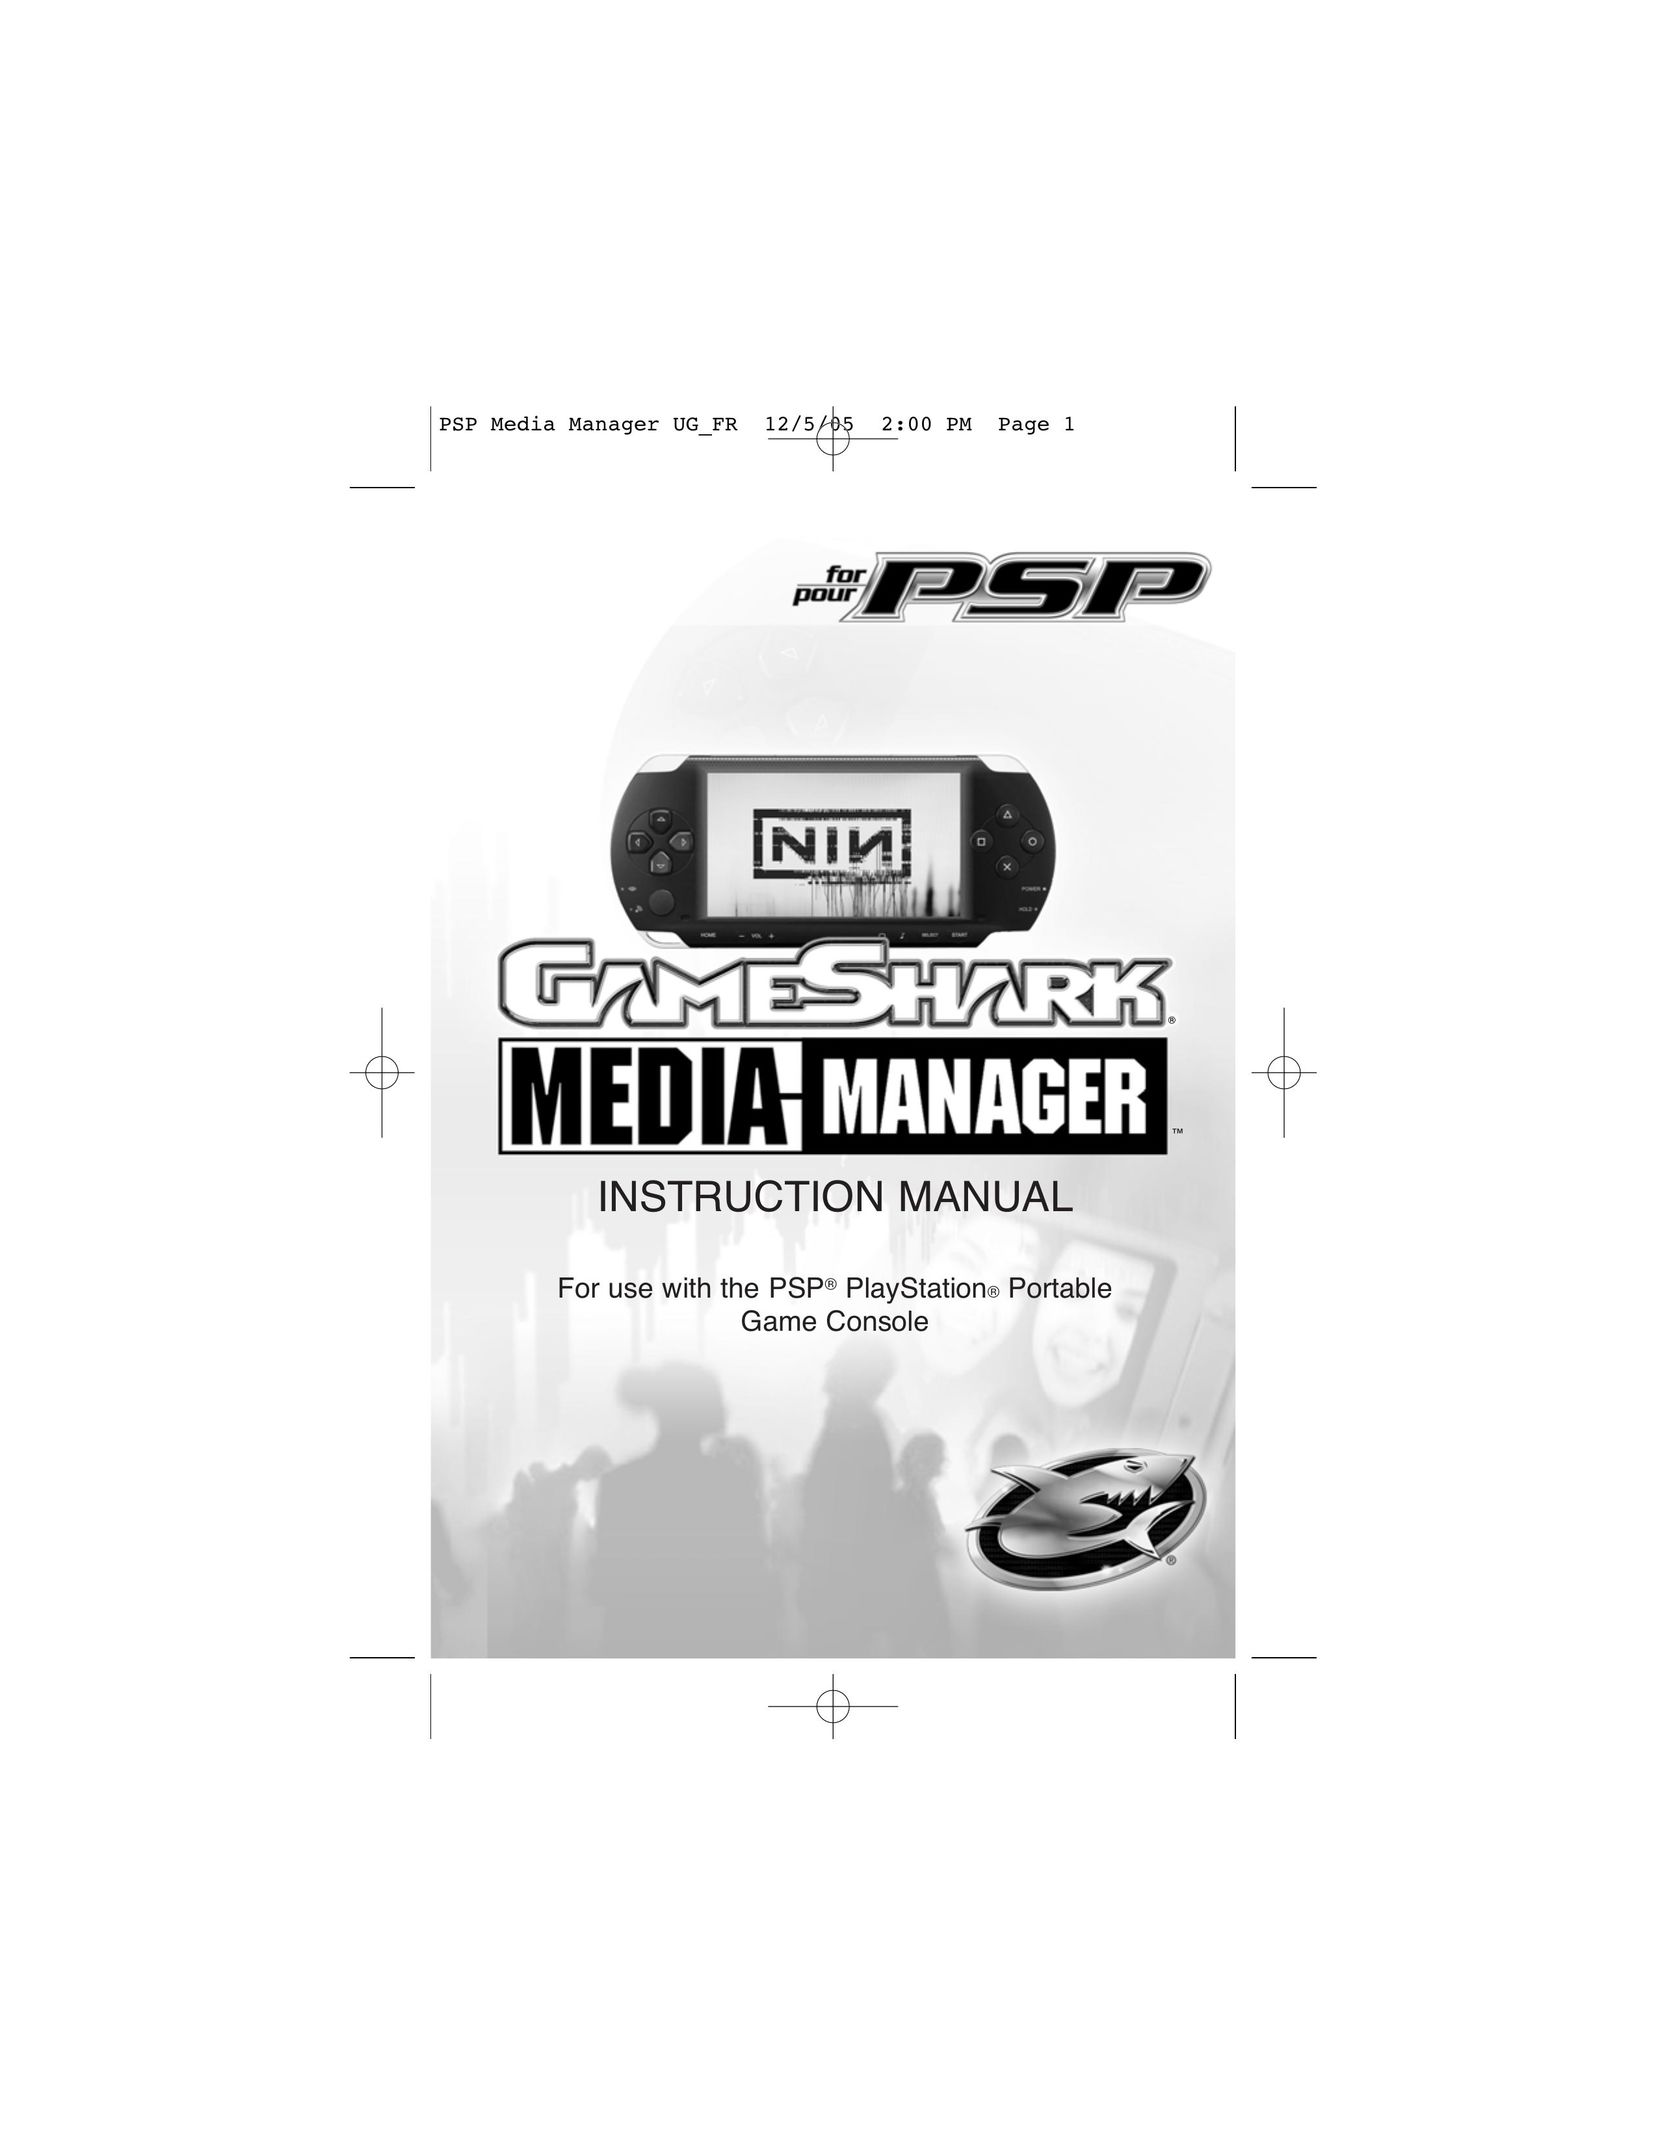 Apple Media Manager for PSP Computer Accessories User Manual